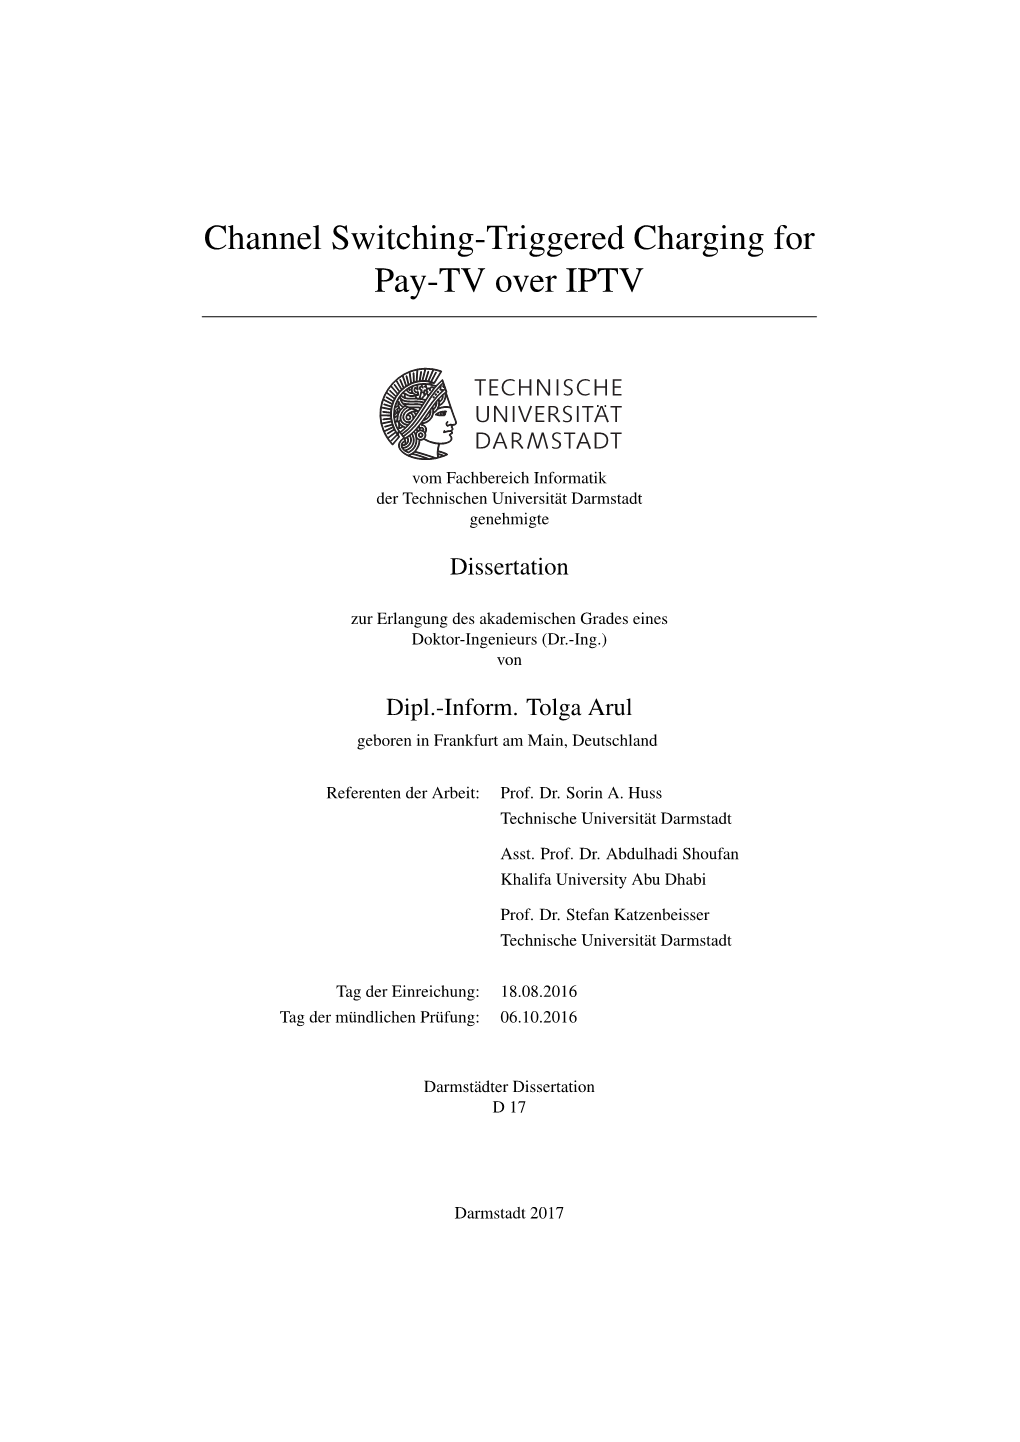 Channel Switching-Triggered Charging for Pay-TV Over IPTV